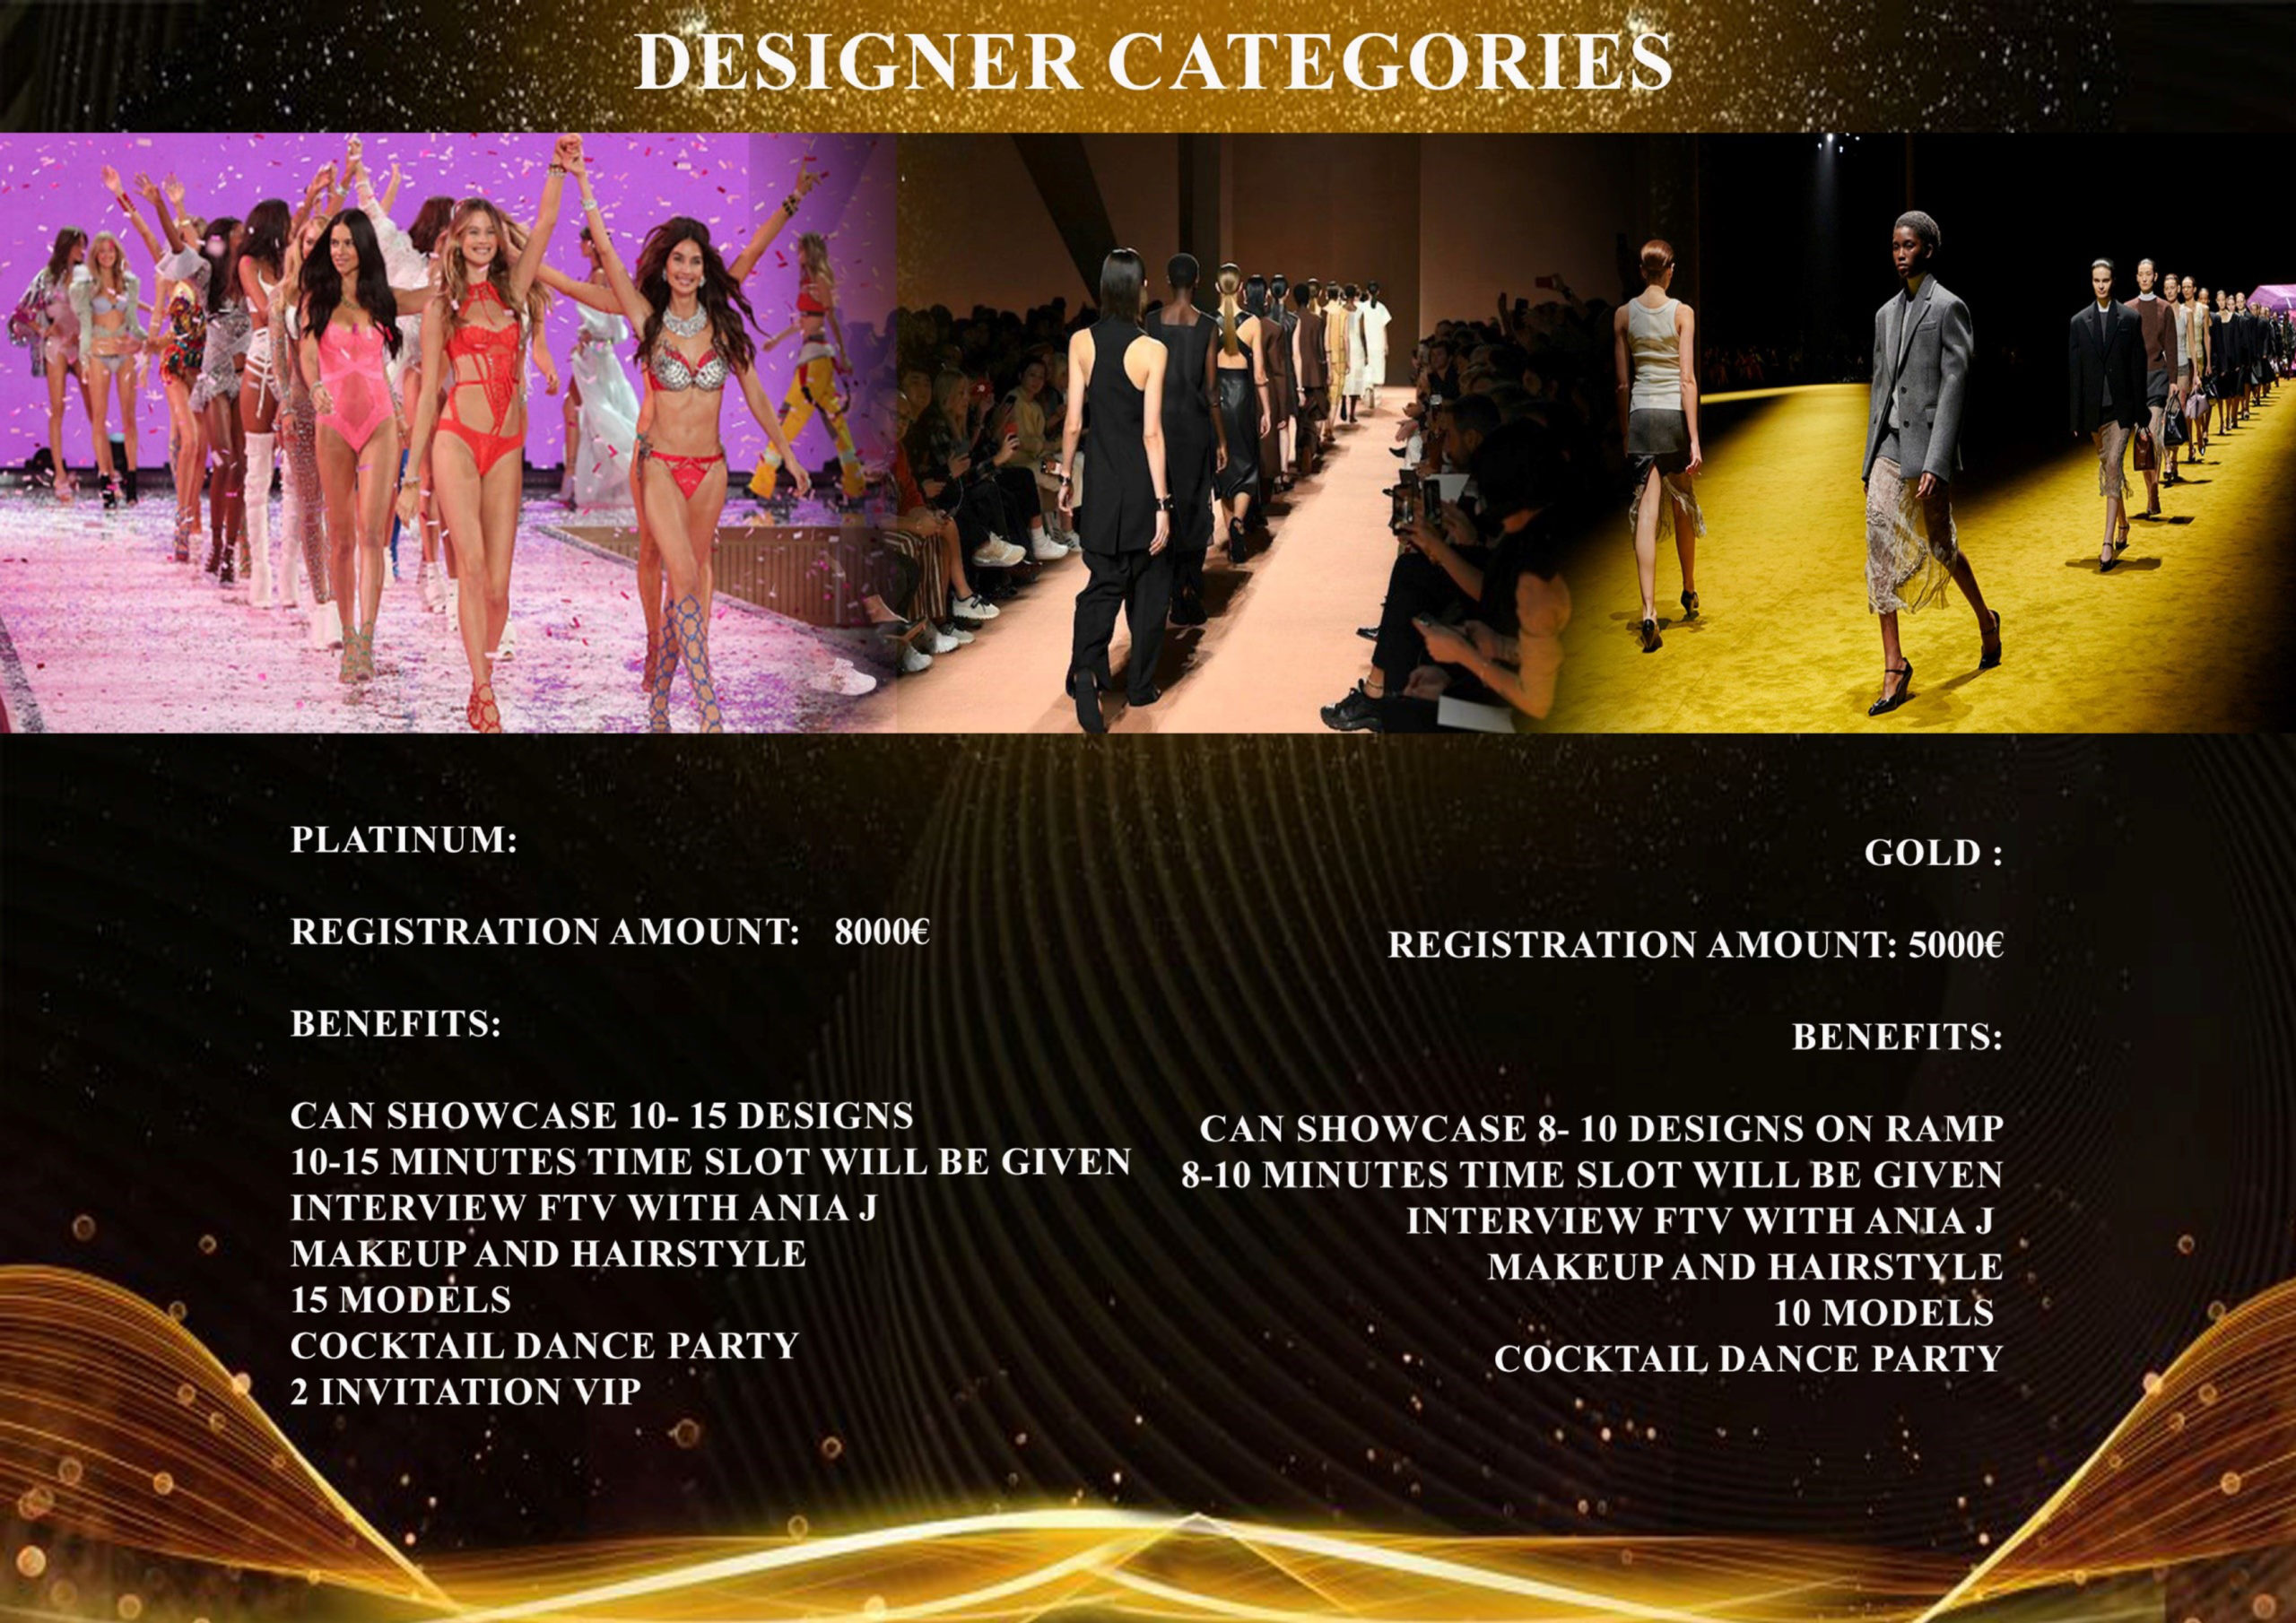 AFRICA-VOGUE-COVER-Designers-Call-AEFW-presents-fashiontv-OFFICIAL-FASHION-PARTY-SHOW-IN-CANNES-76TH-Edition-of-CANNES-FESTIVAL-Designer-Categories-DN-AFRICA-DN-A-INTERNATIONAL-Media-Partner